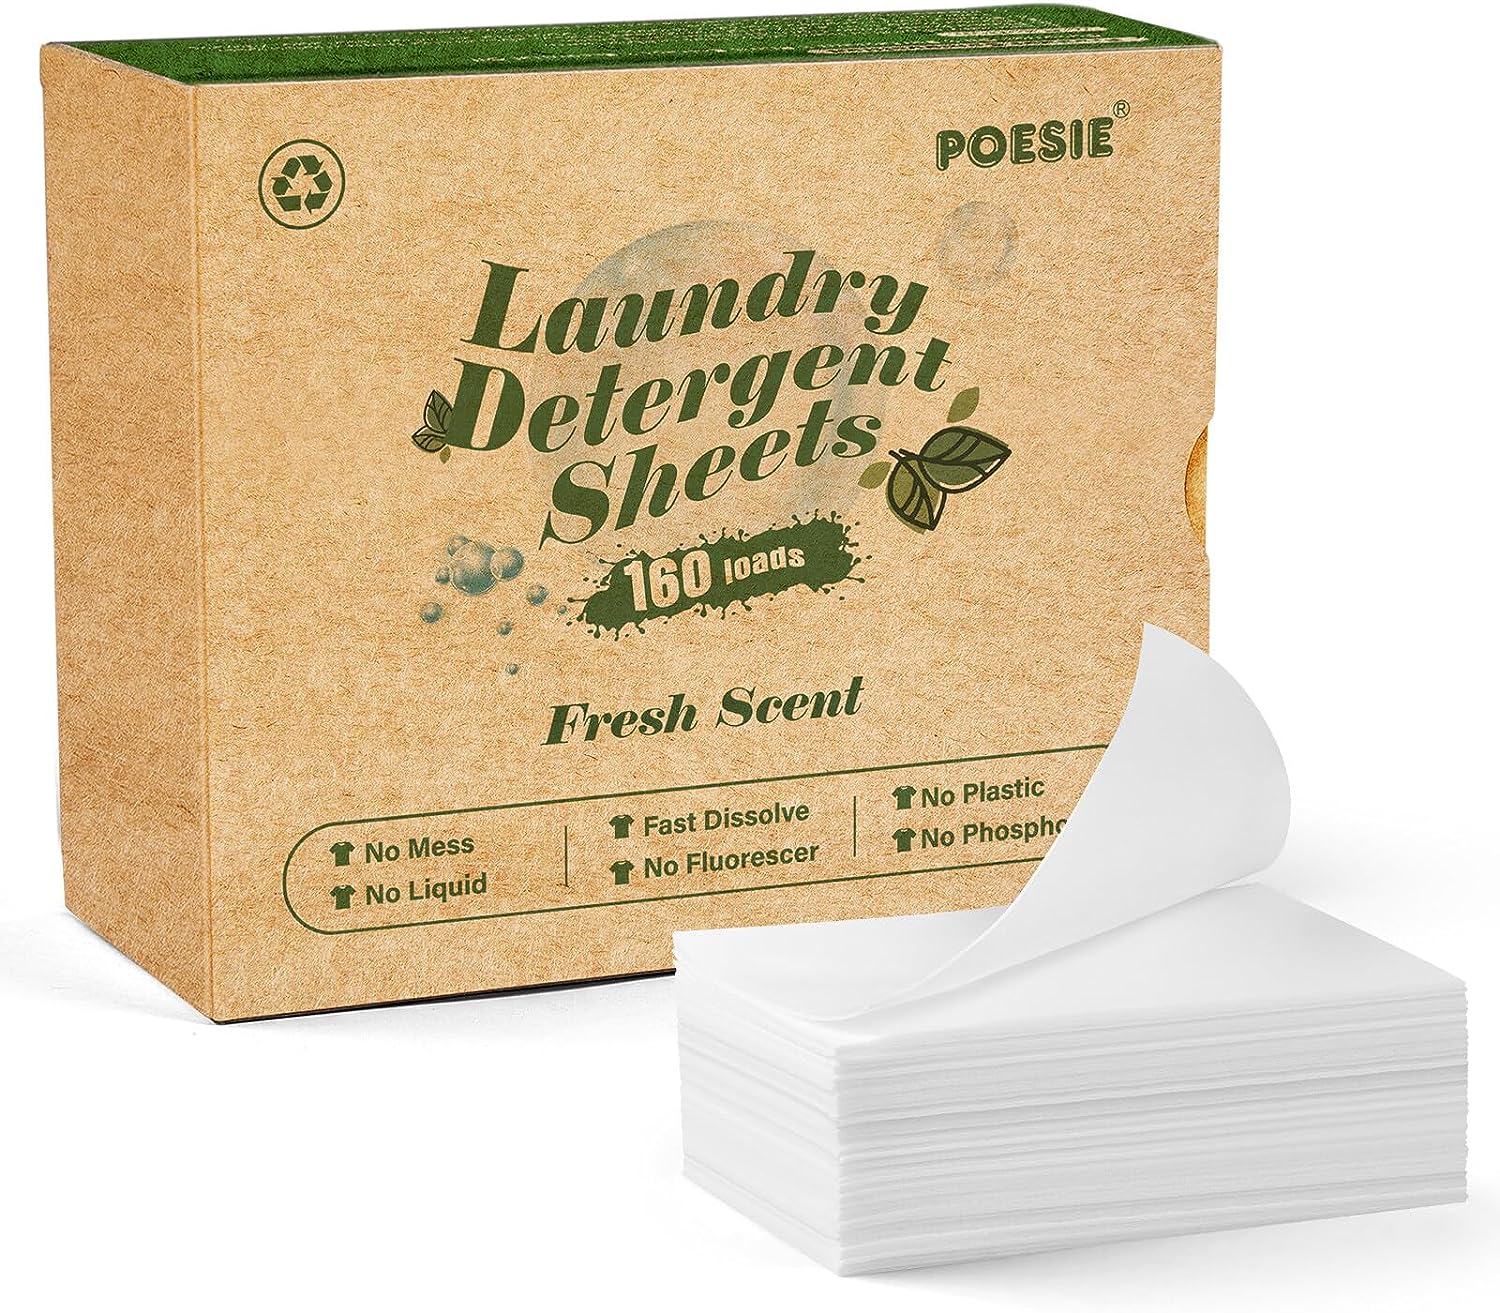 Poesie Laundry Detergent Sheets Eco-Friendly 160 [...]